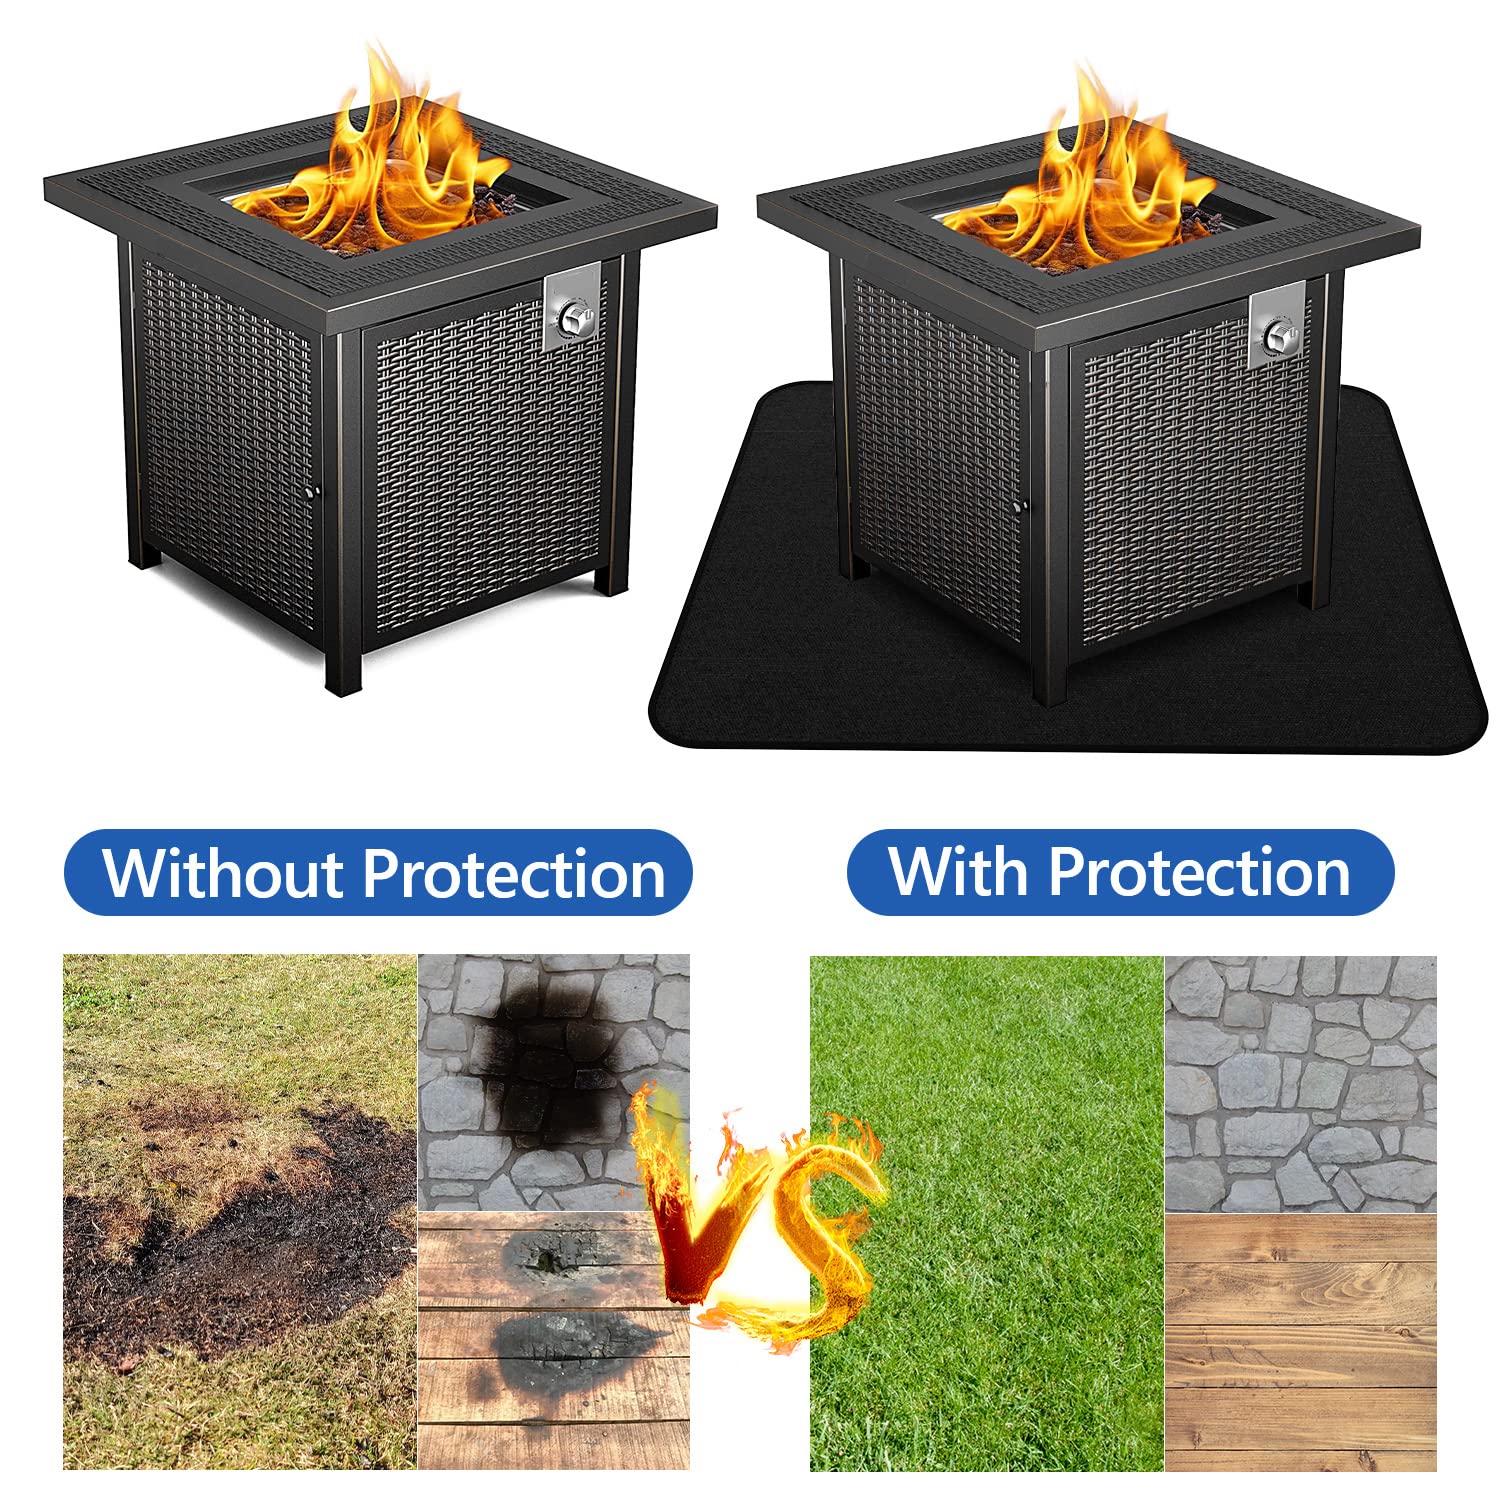 Under Grill Mat, 48×30 inches Deck and Patio Protective Mats, Double-Sided Fireproof Oil-Proof Grill Mats for Outdoor Grill, Fireproof Grill Pads for Outdoor Charcoal, Flat Top, Smokers, Gas Grills